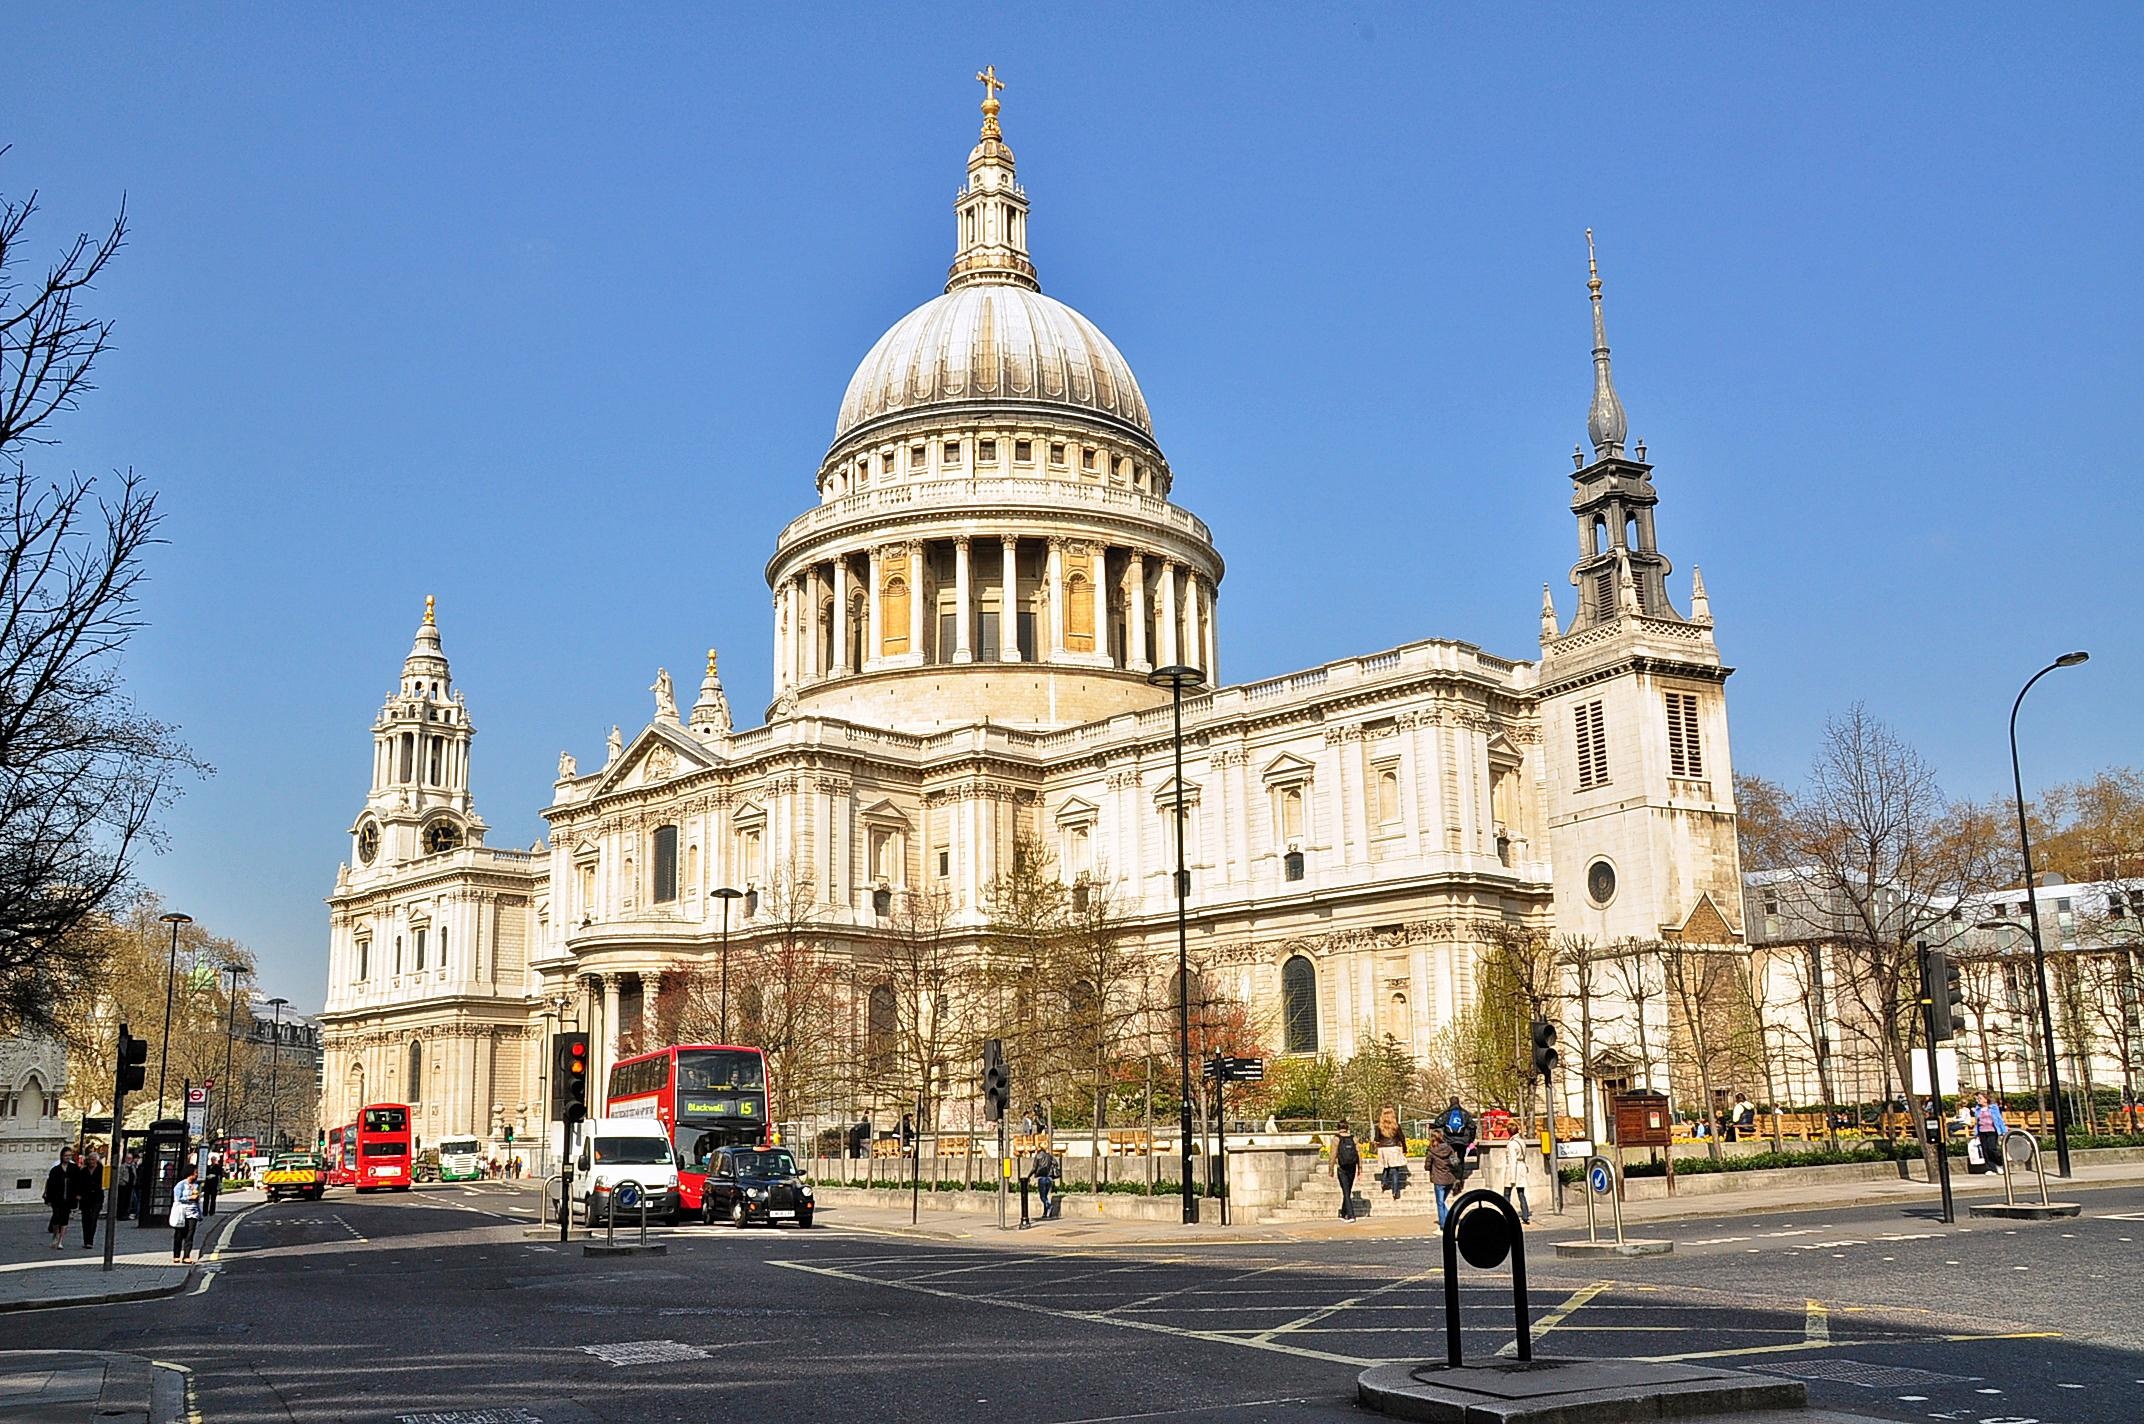 St. Paul's Cathedral, High-quality wallpapers, Architectural splendor, Majestic beauty, 2150x1430 HD Desktop